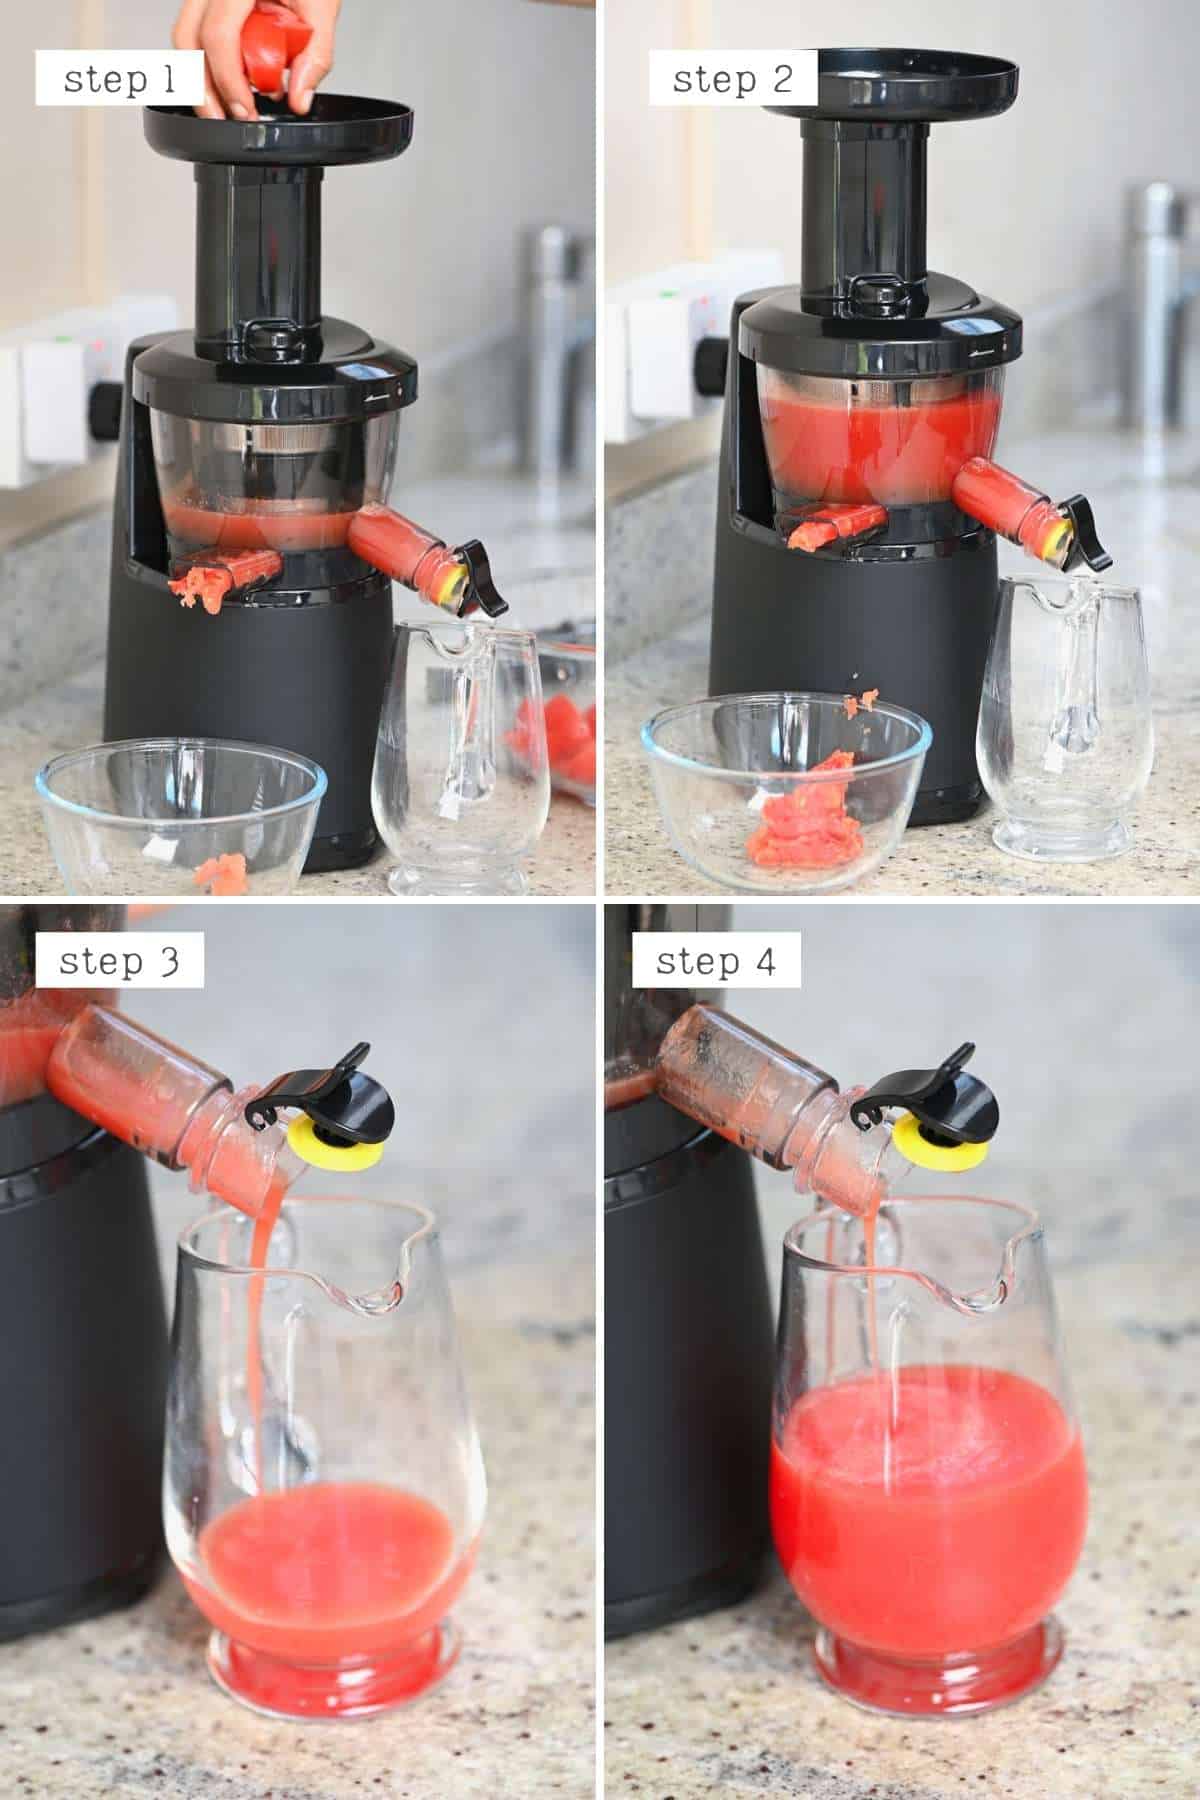 Juicing tomatoes in a juicer